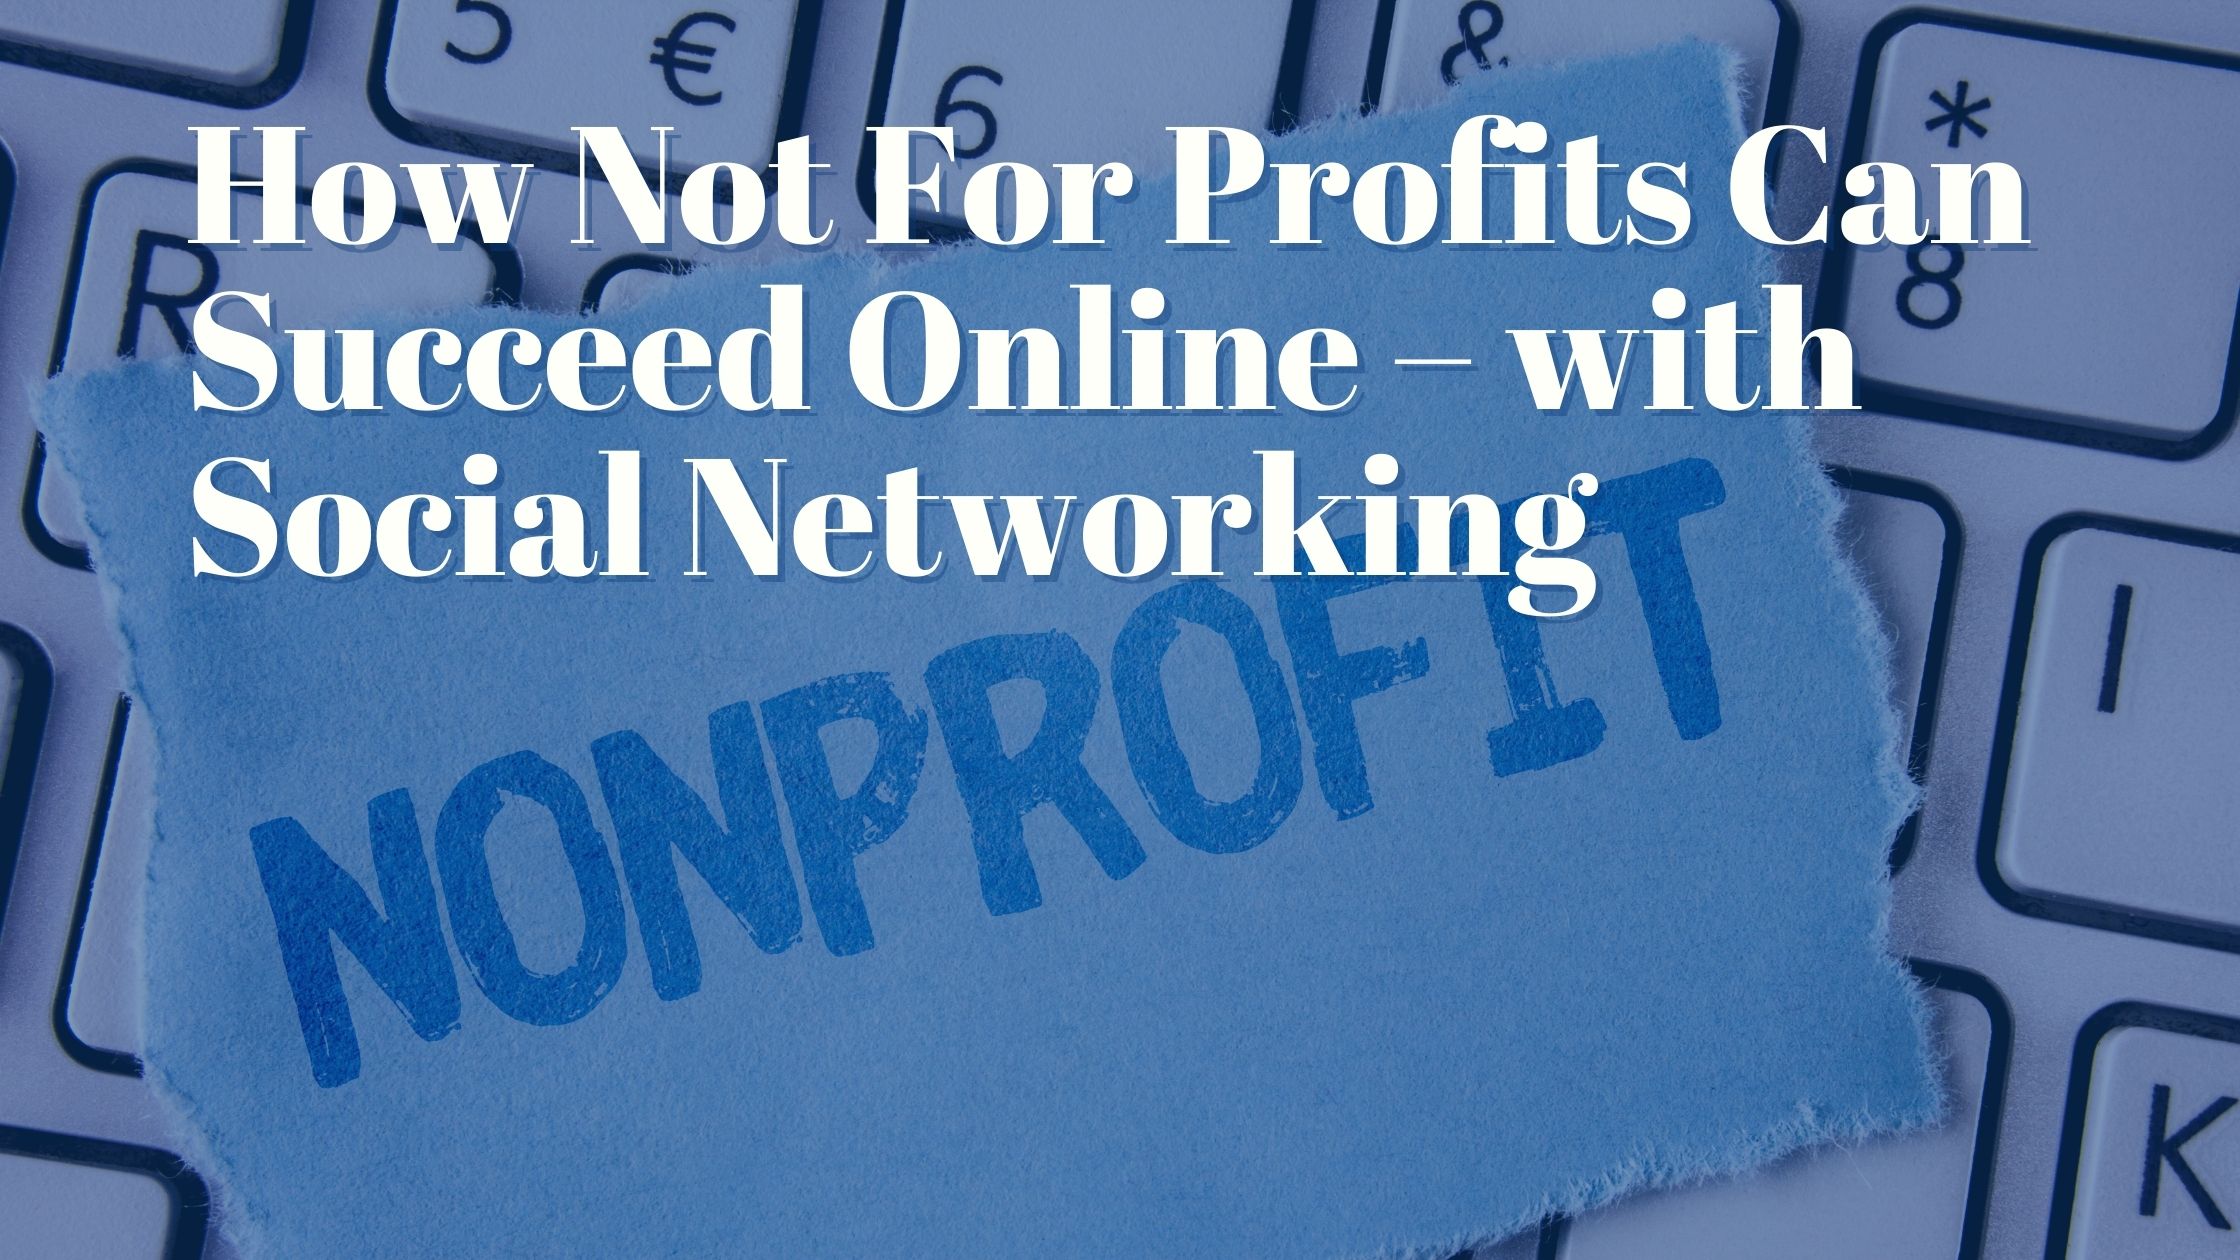 How Not For Profits Can Succeed Online – with Social Networking